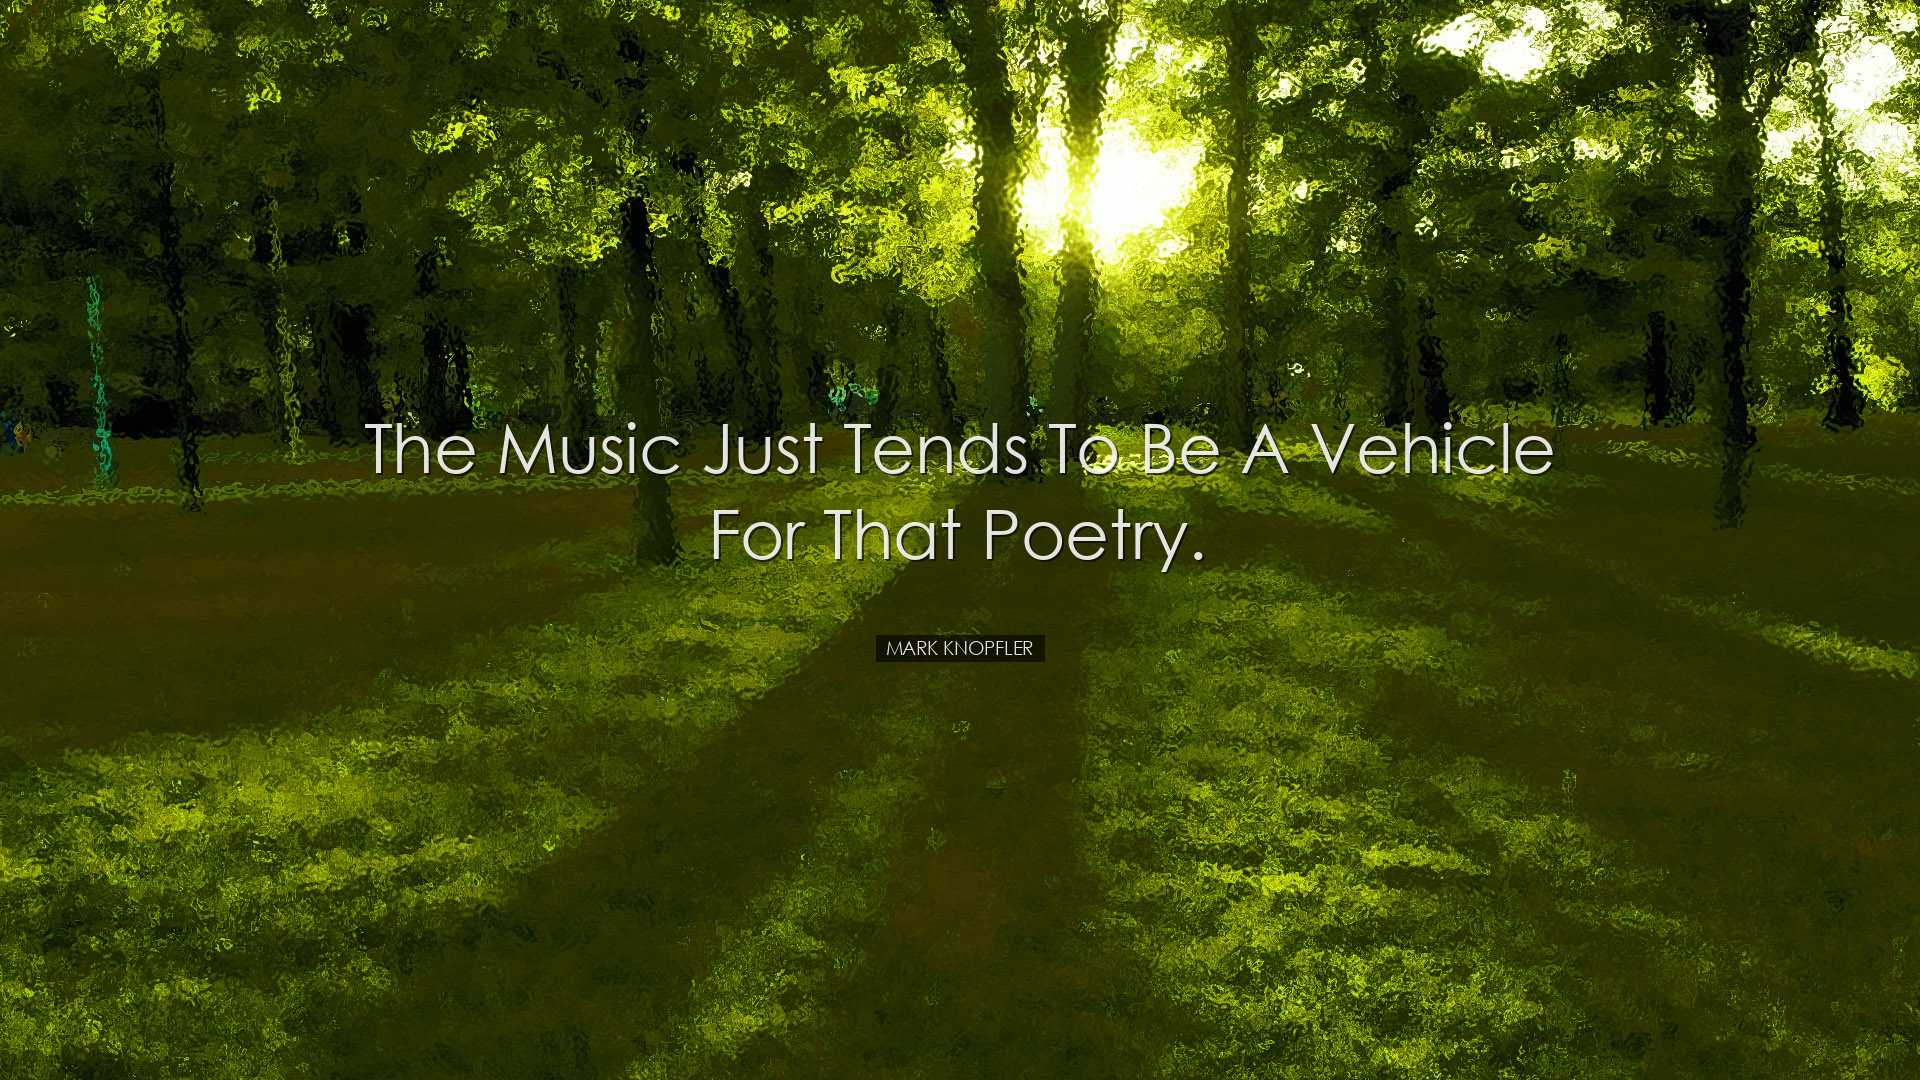 The music just tends to be a vehicle for that poetry. - Mark Knopf